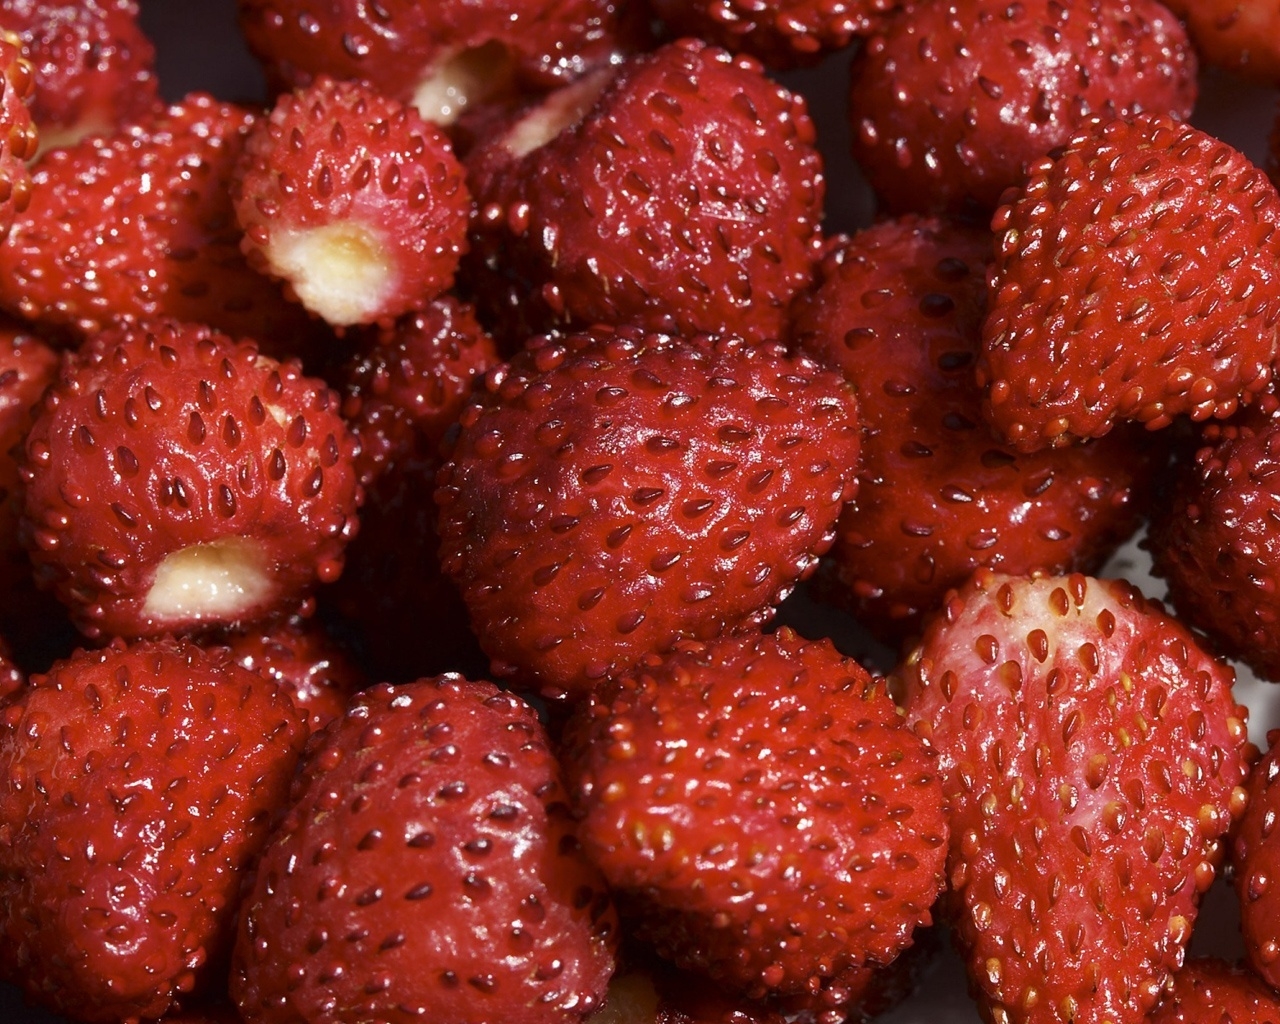 Strawberries for 1280 x 1024 resolution